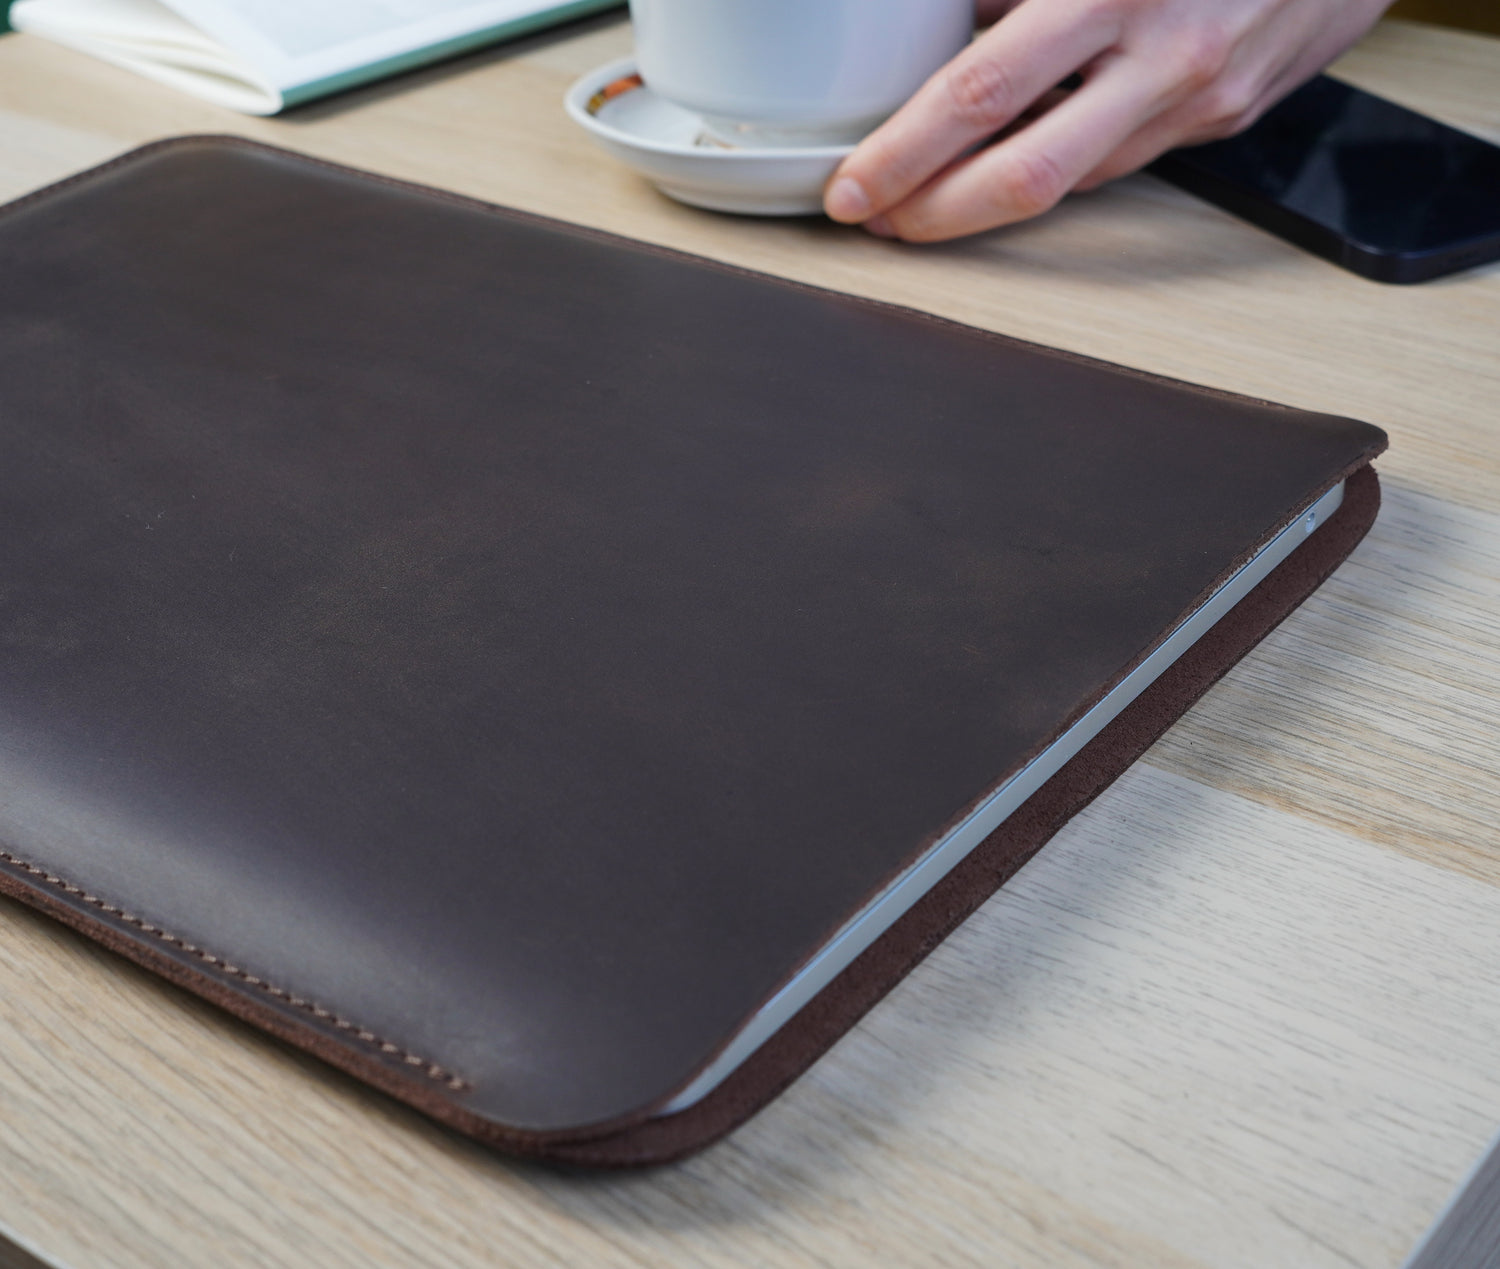 Leather sleeve for new macbook 13 M2 2022 – AarteDesign